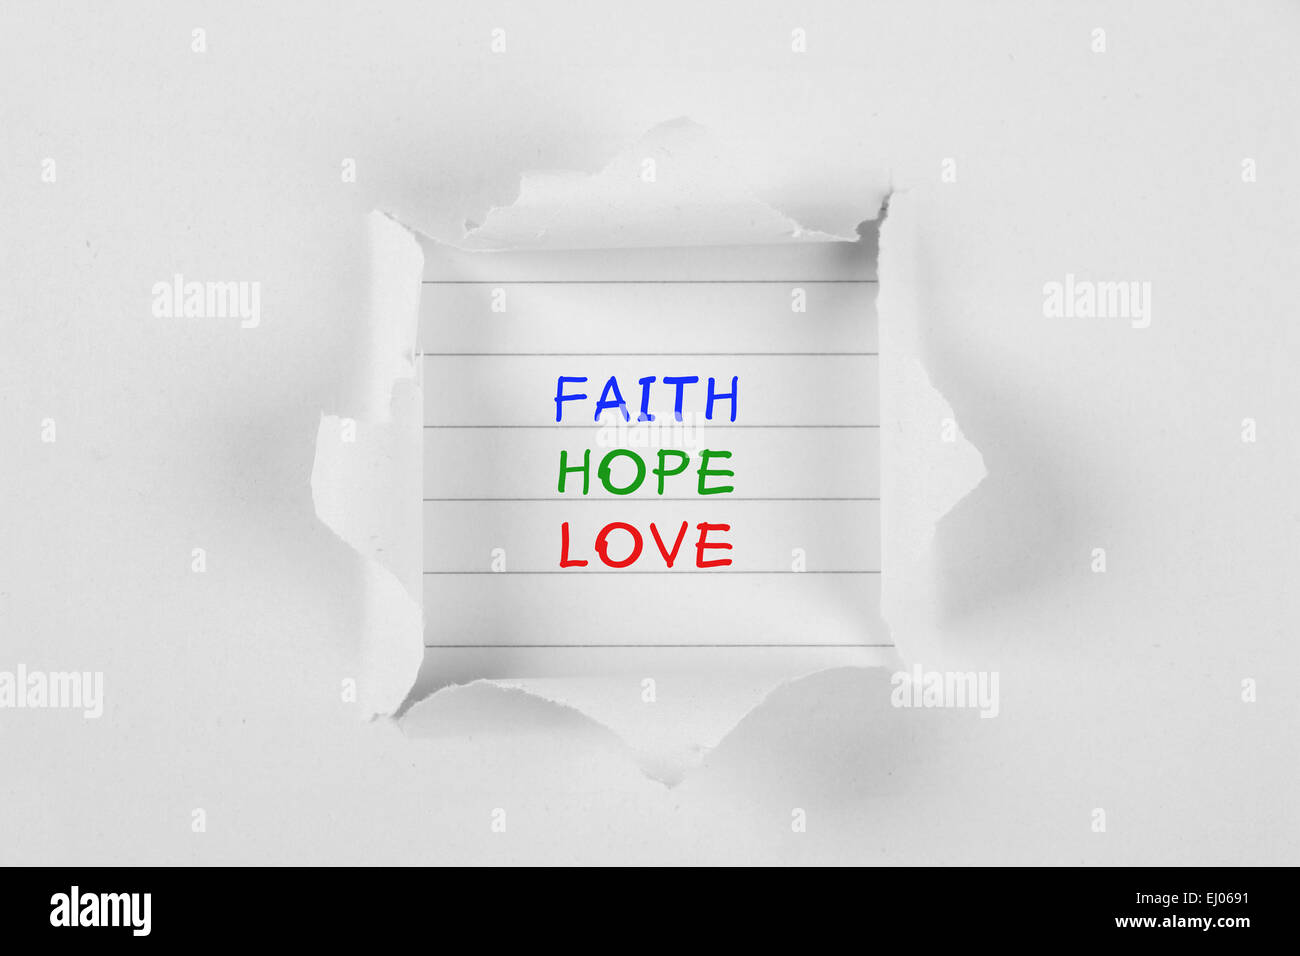 Faith, hope, love on note paper with white tear paper. Stock Photo